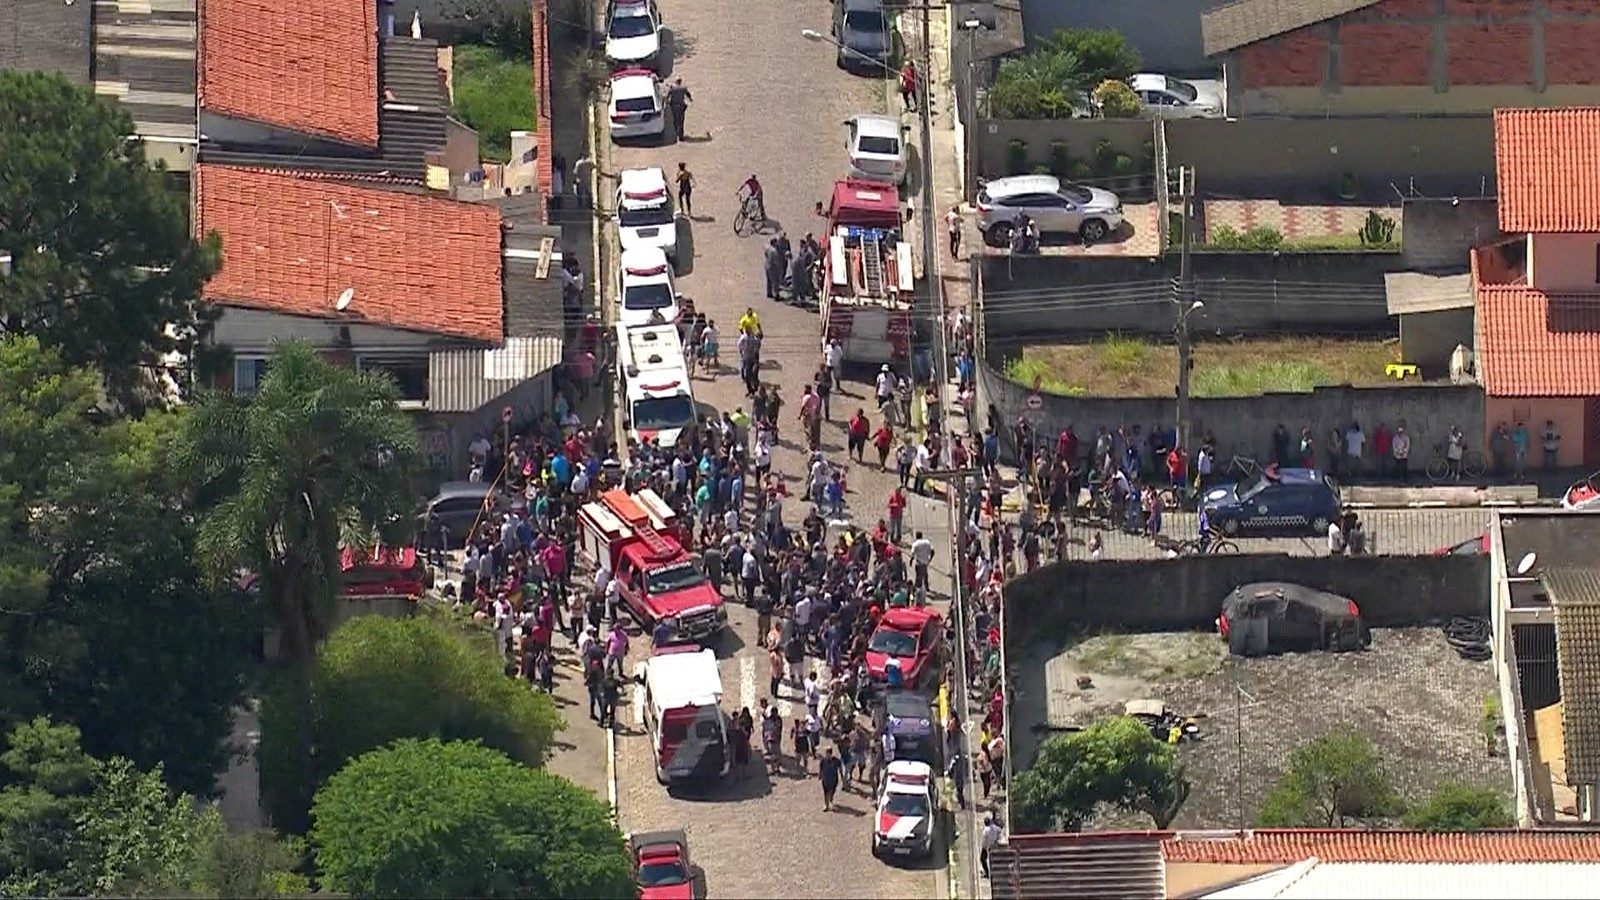 People gathered in front of Raul Brasil school, where students and teachers were killed